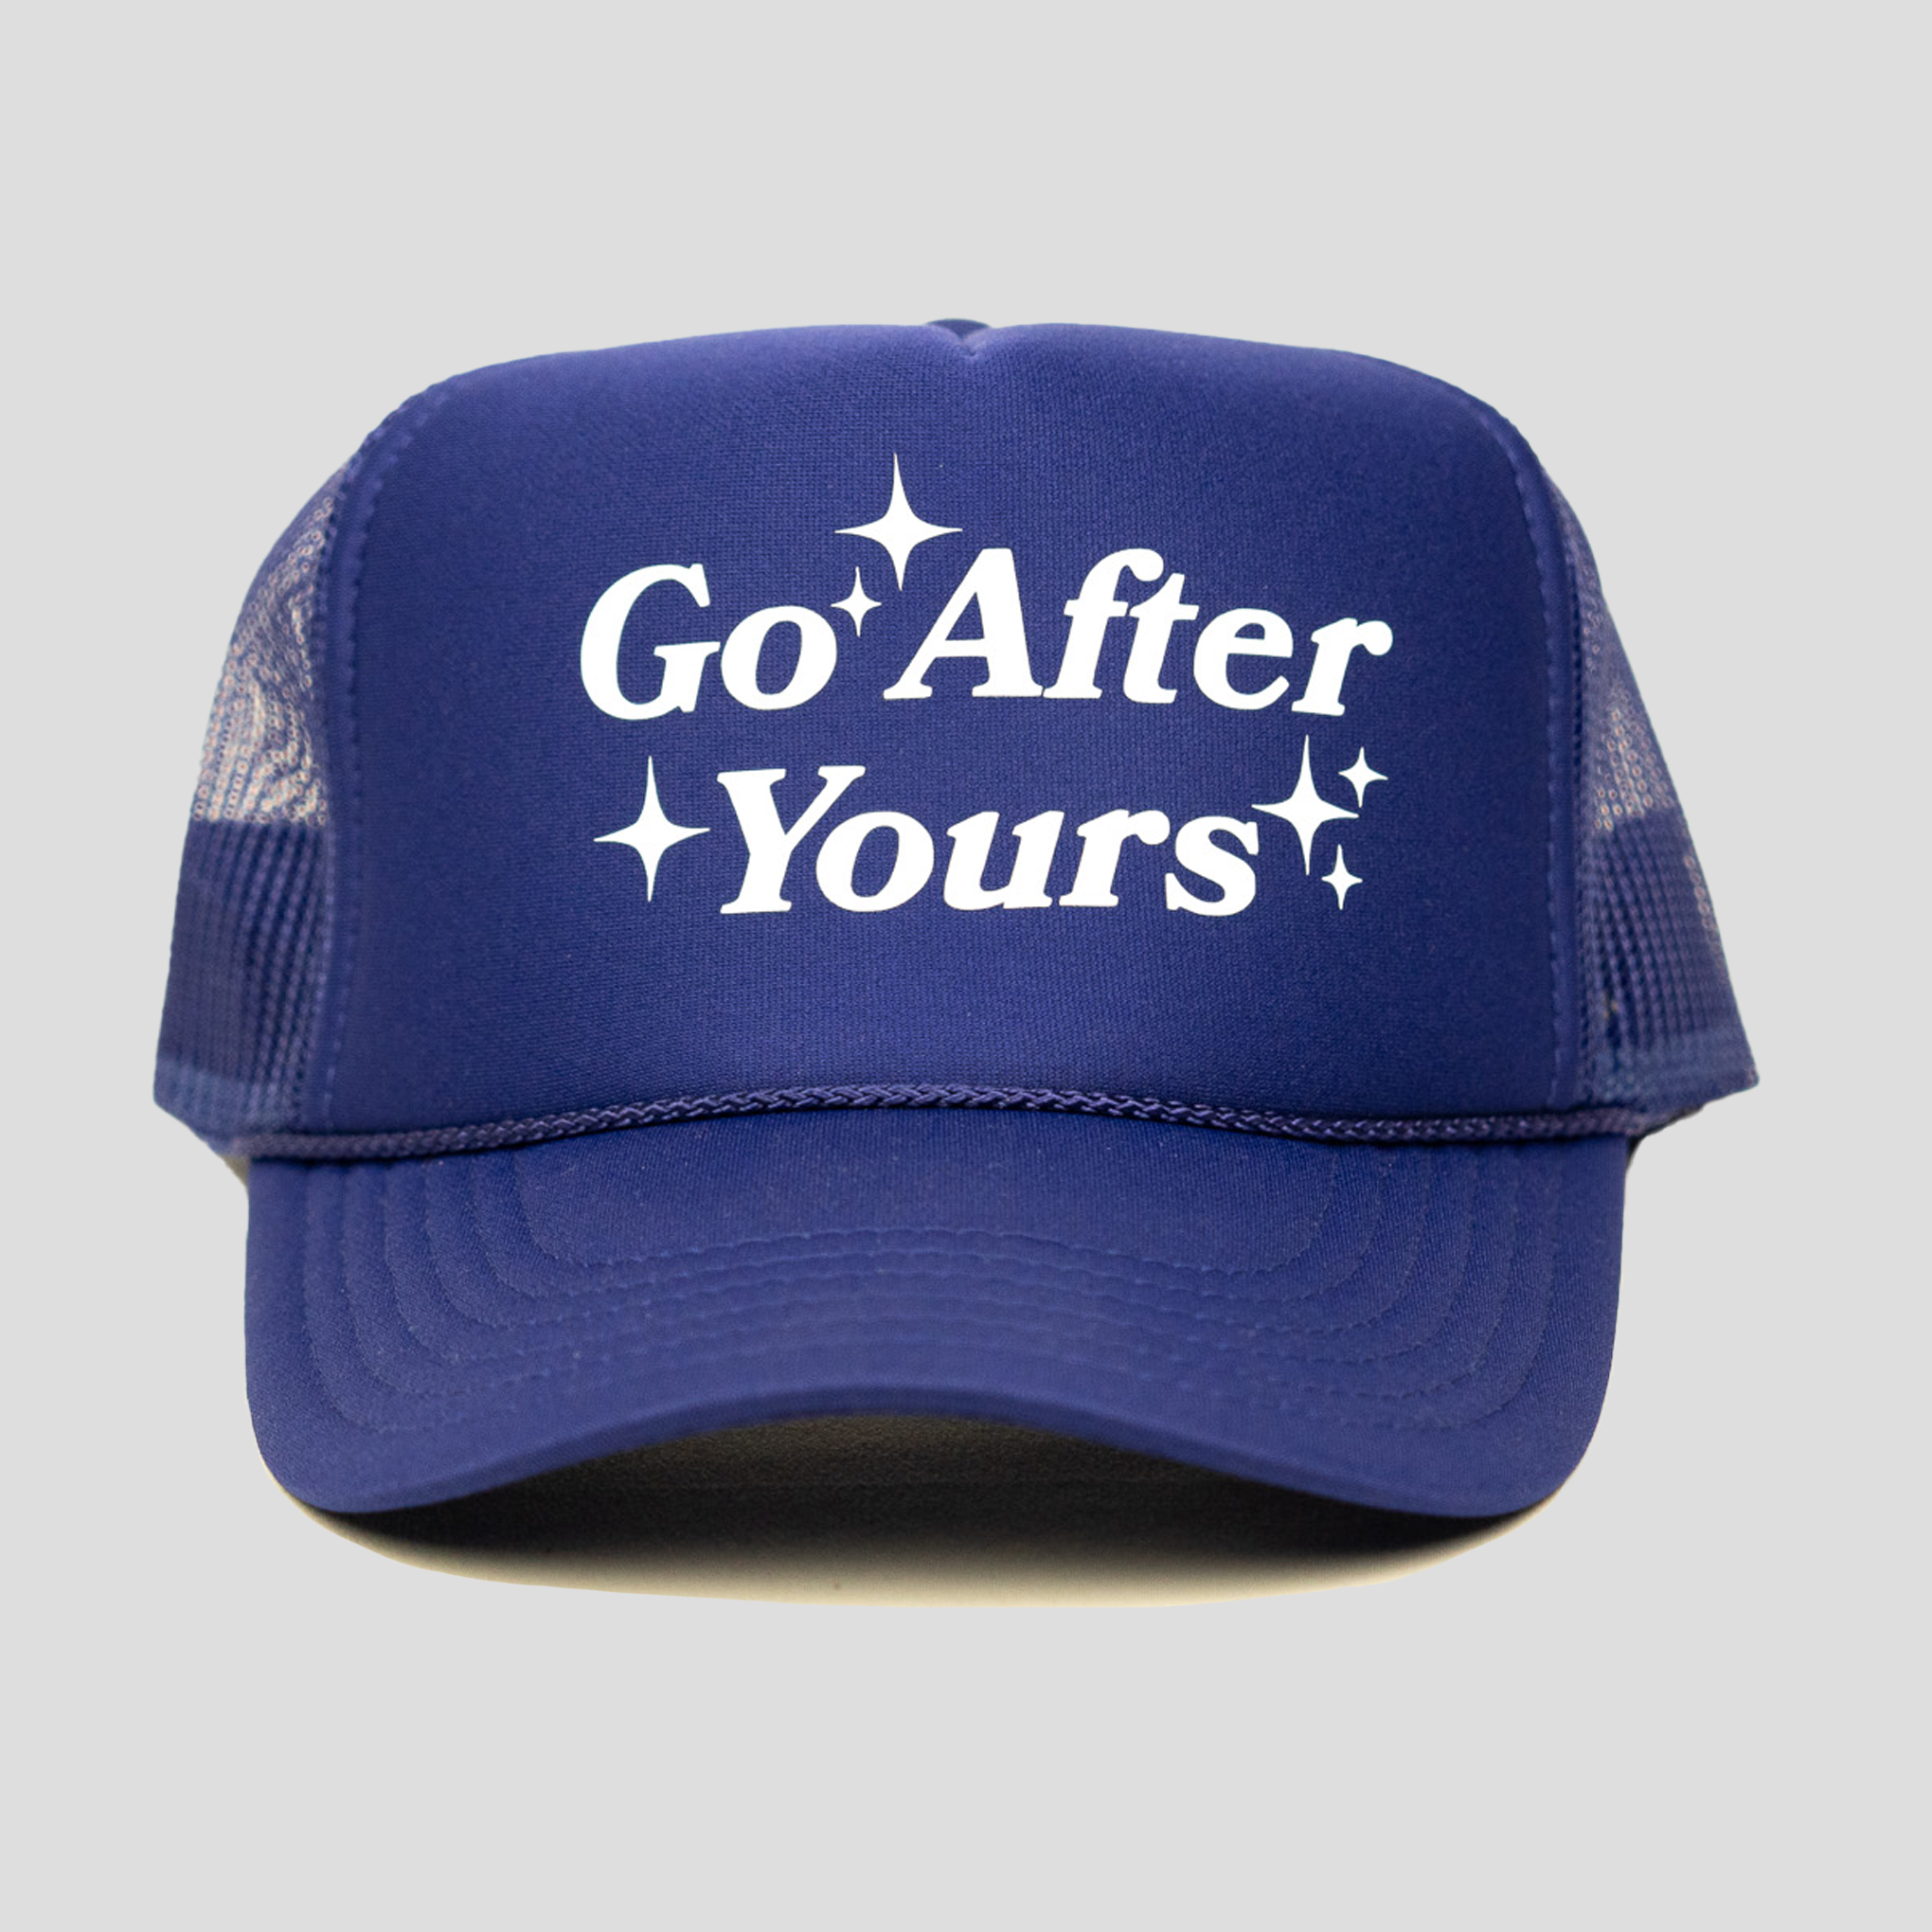 Go After Yours Trucker Hat (PURPLE)